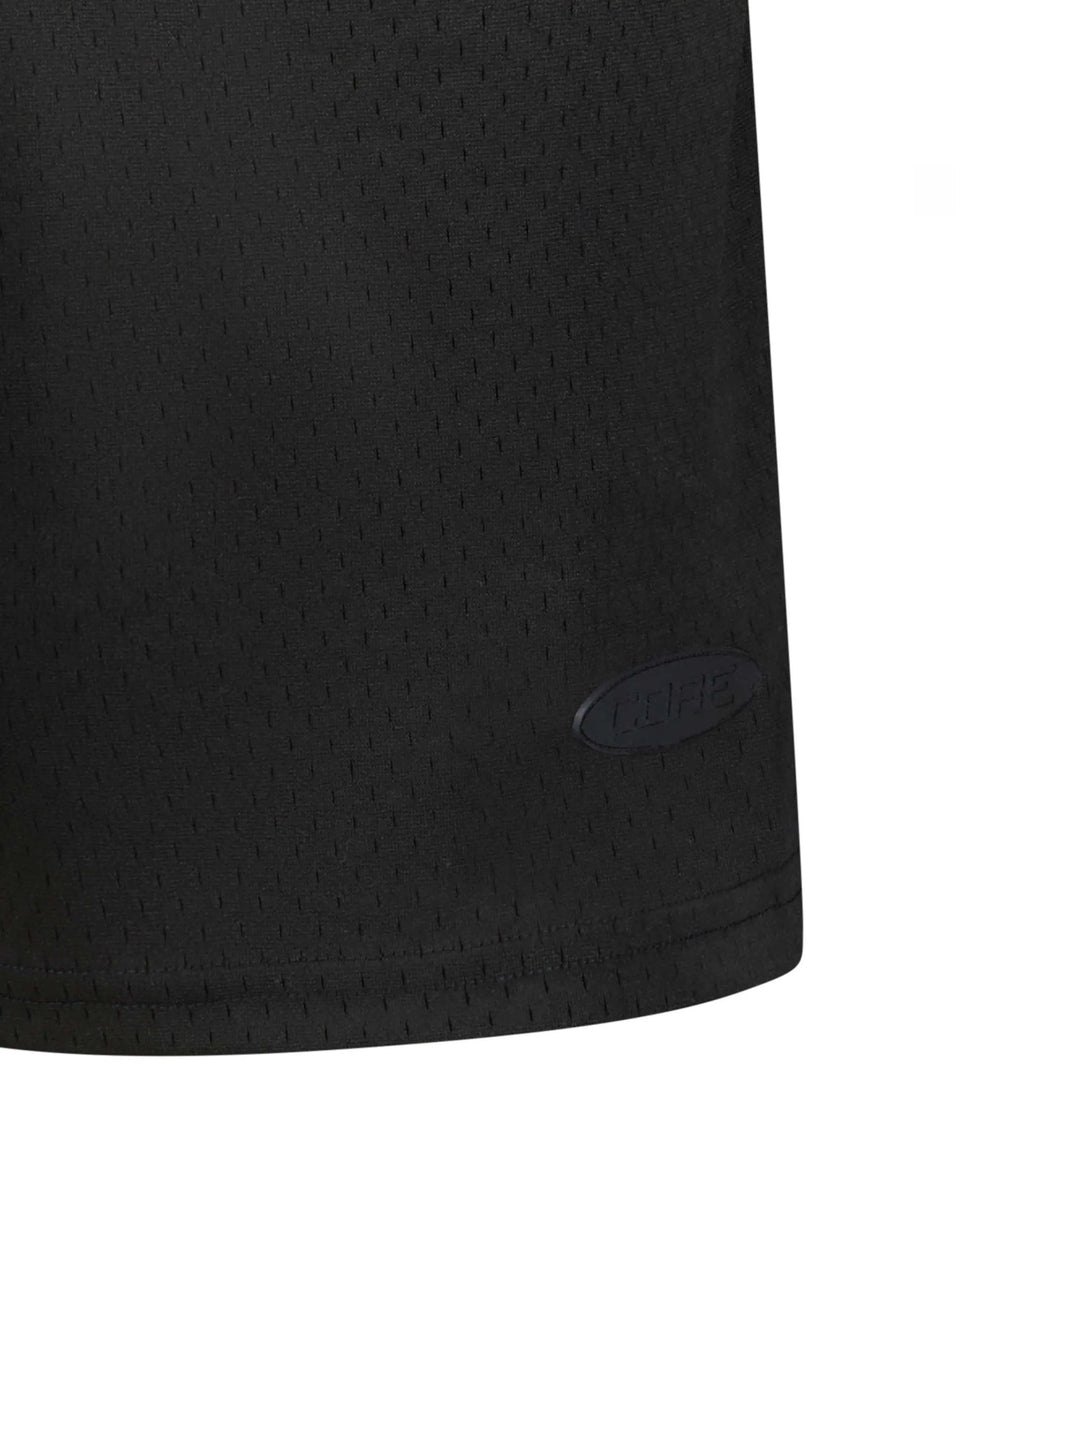 CORE Essential Mesh Shorts Ater in Auckland, New Zealand - Shop name